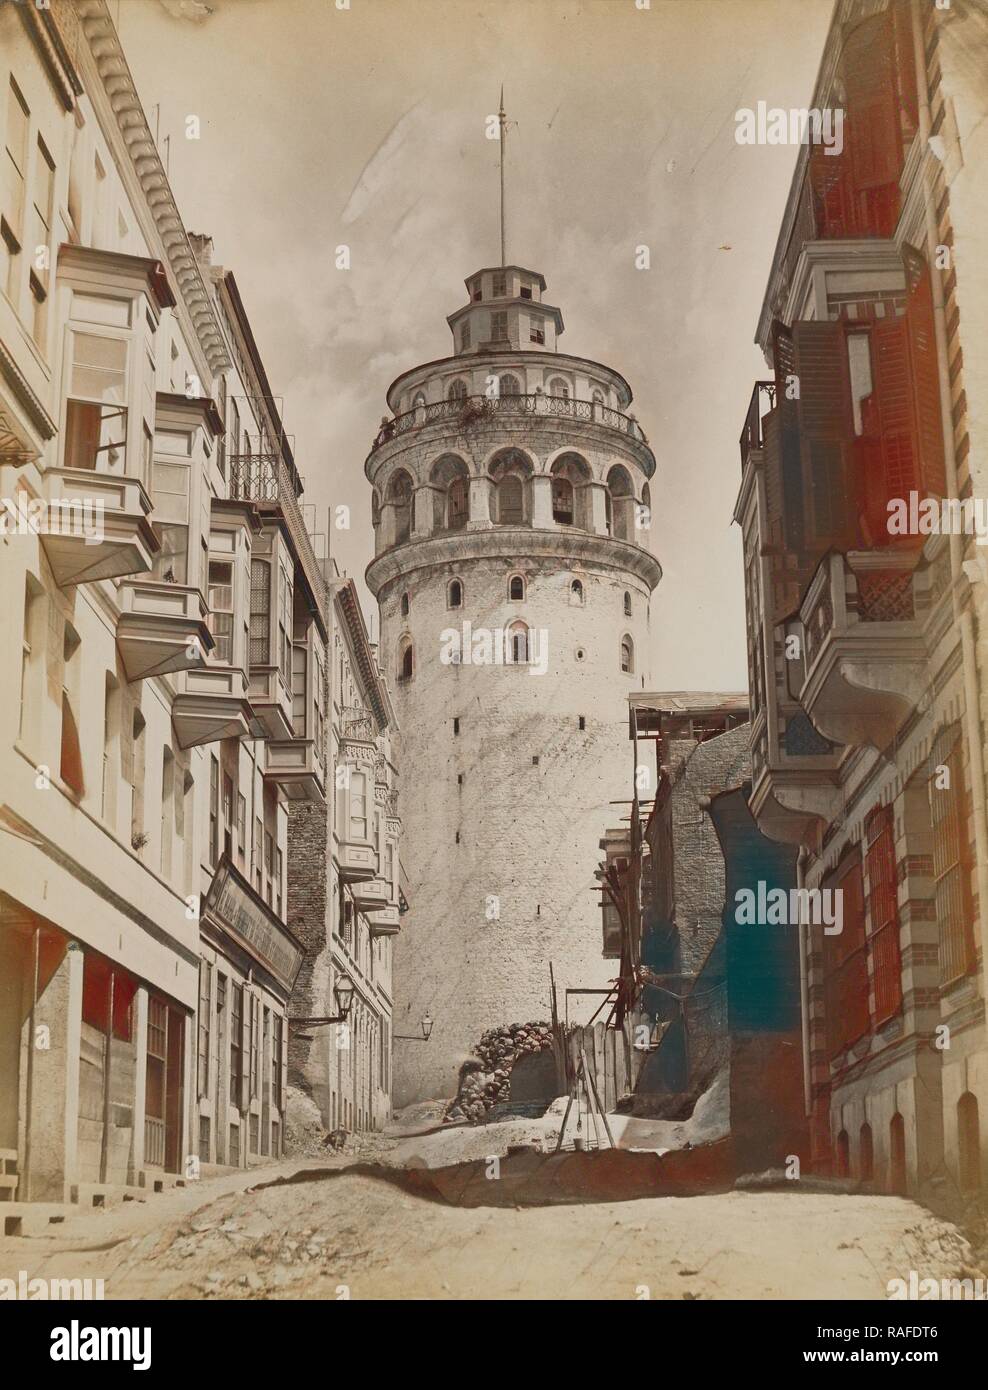 Tower of Galata, Constantinople, Abdullah Frères (Armenian, active 1860s - 1890s), Istanbul, Turkey, 1858 - 1890 reimagined Stock Photo